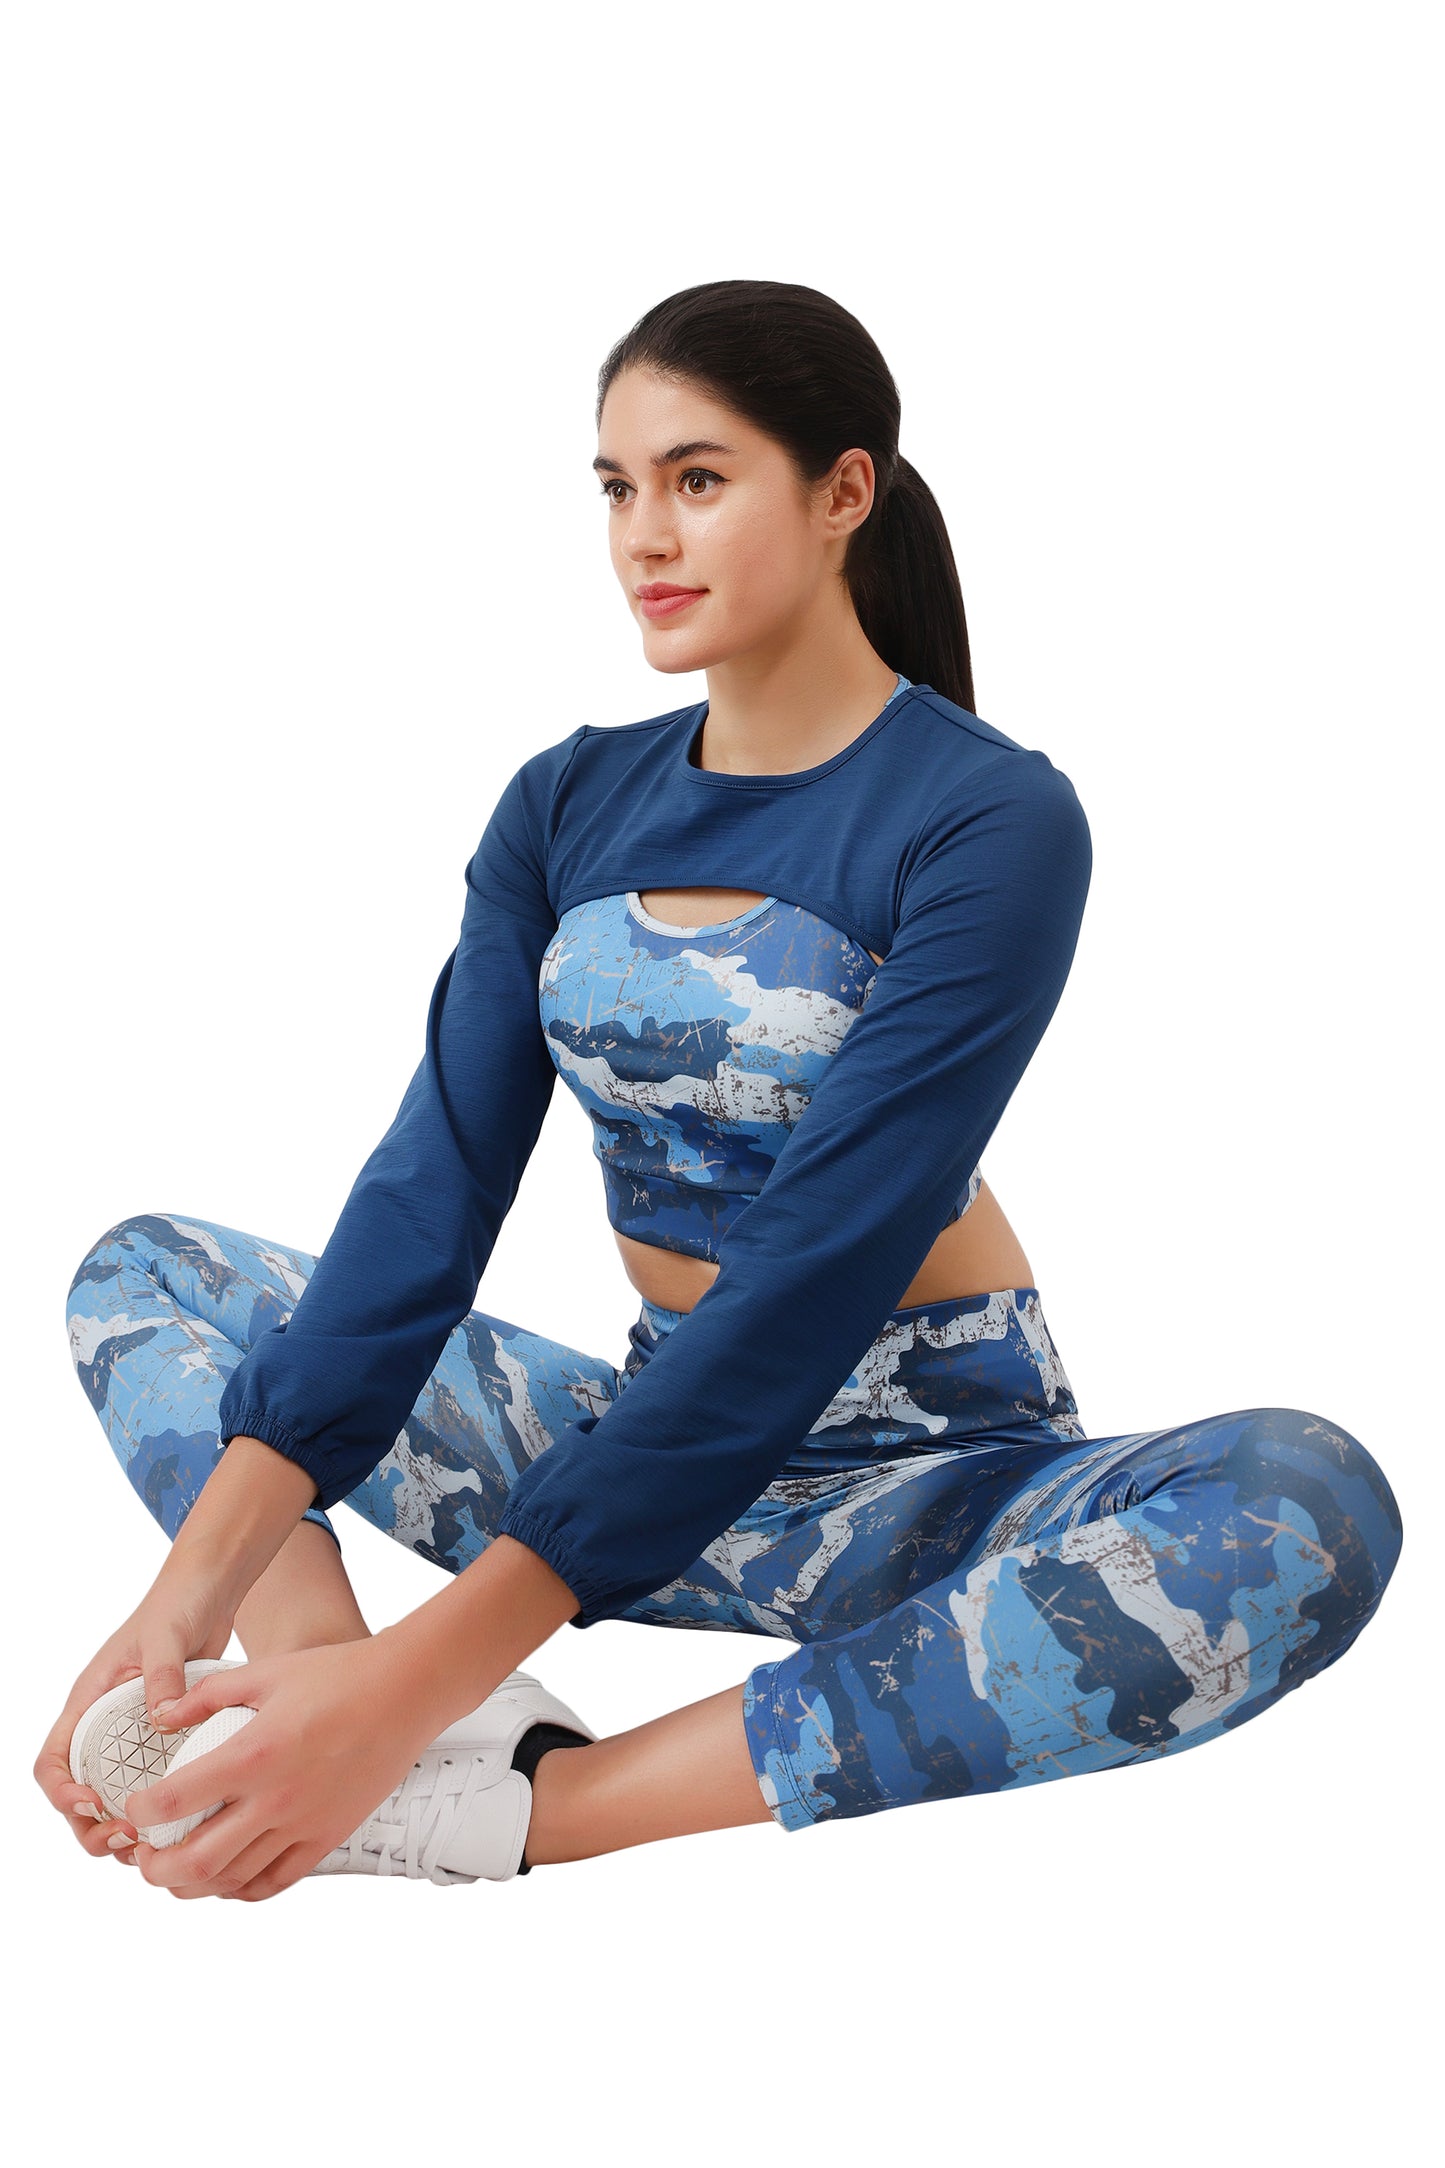 NUEVOSDAMAS BLUE CAMOUFLAGE PRINT DRY FIT FABRIC PADDED BRA TOP WITH ATTACHED FULL SLEEVE YOKE AND TRACK PANT - 3 PCS SET